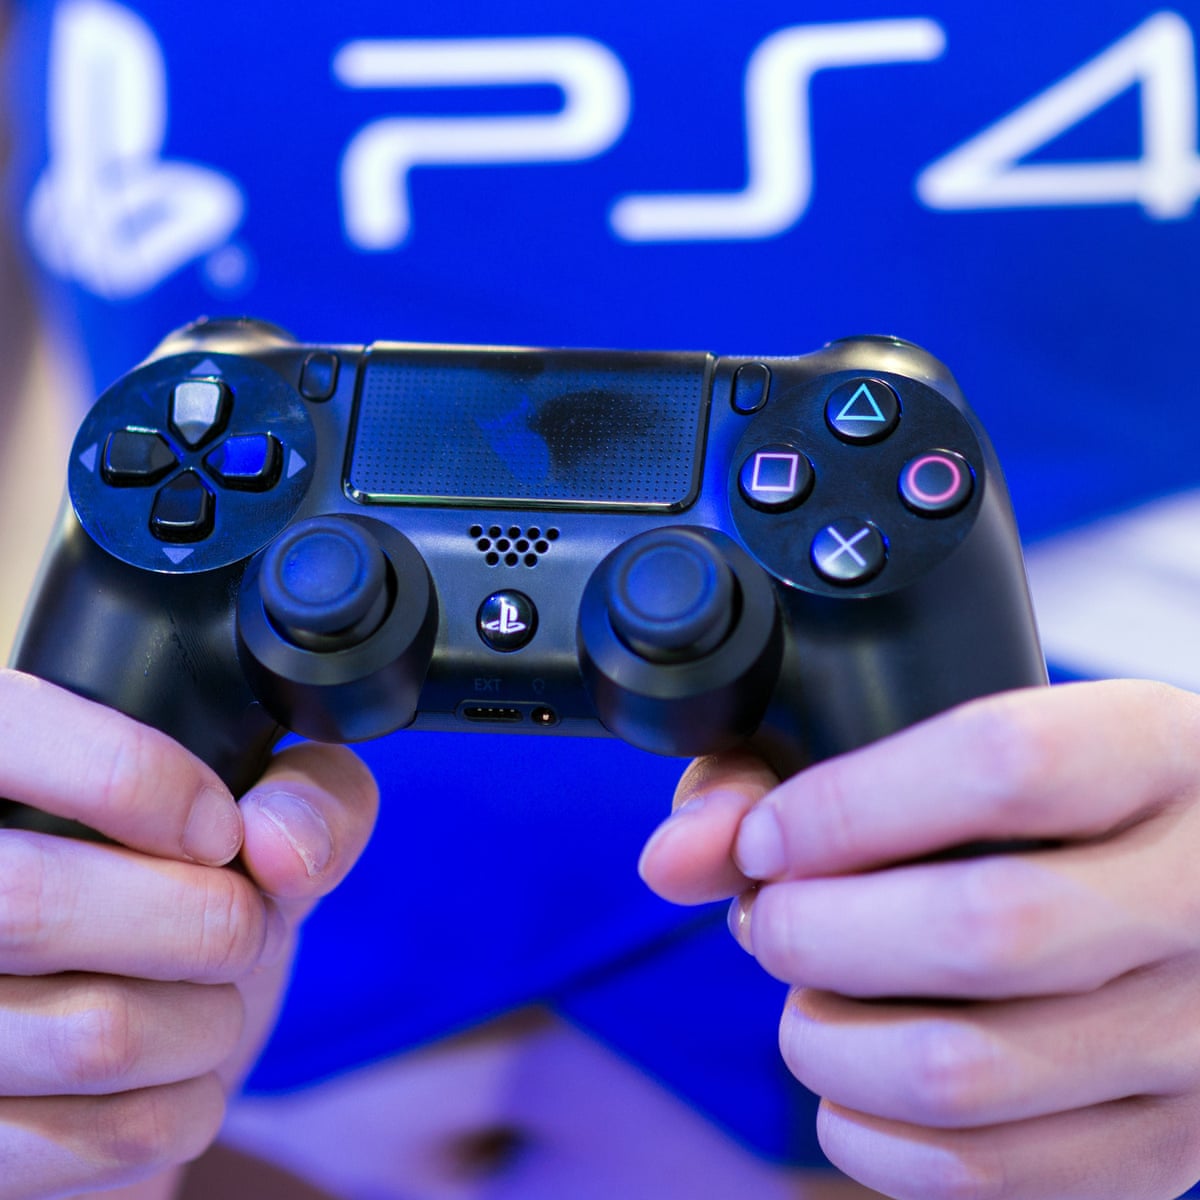 Mægtig sværge halskæde The tale of a modified PlayStation 4 controller means more than a  heartwarming gesture | Games | The Guardian